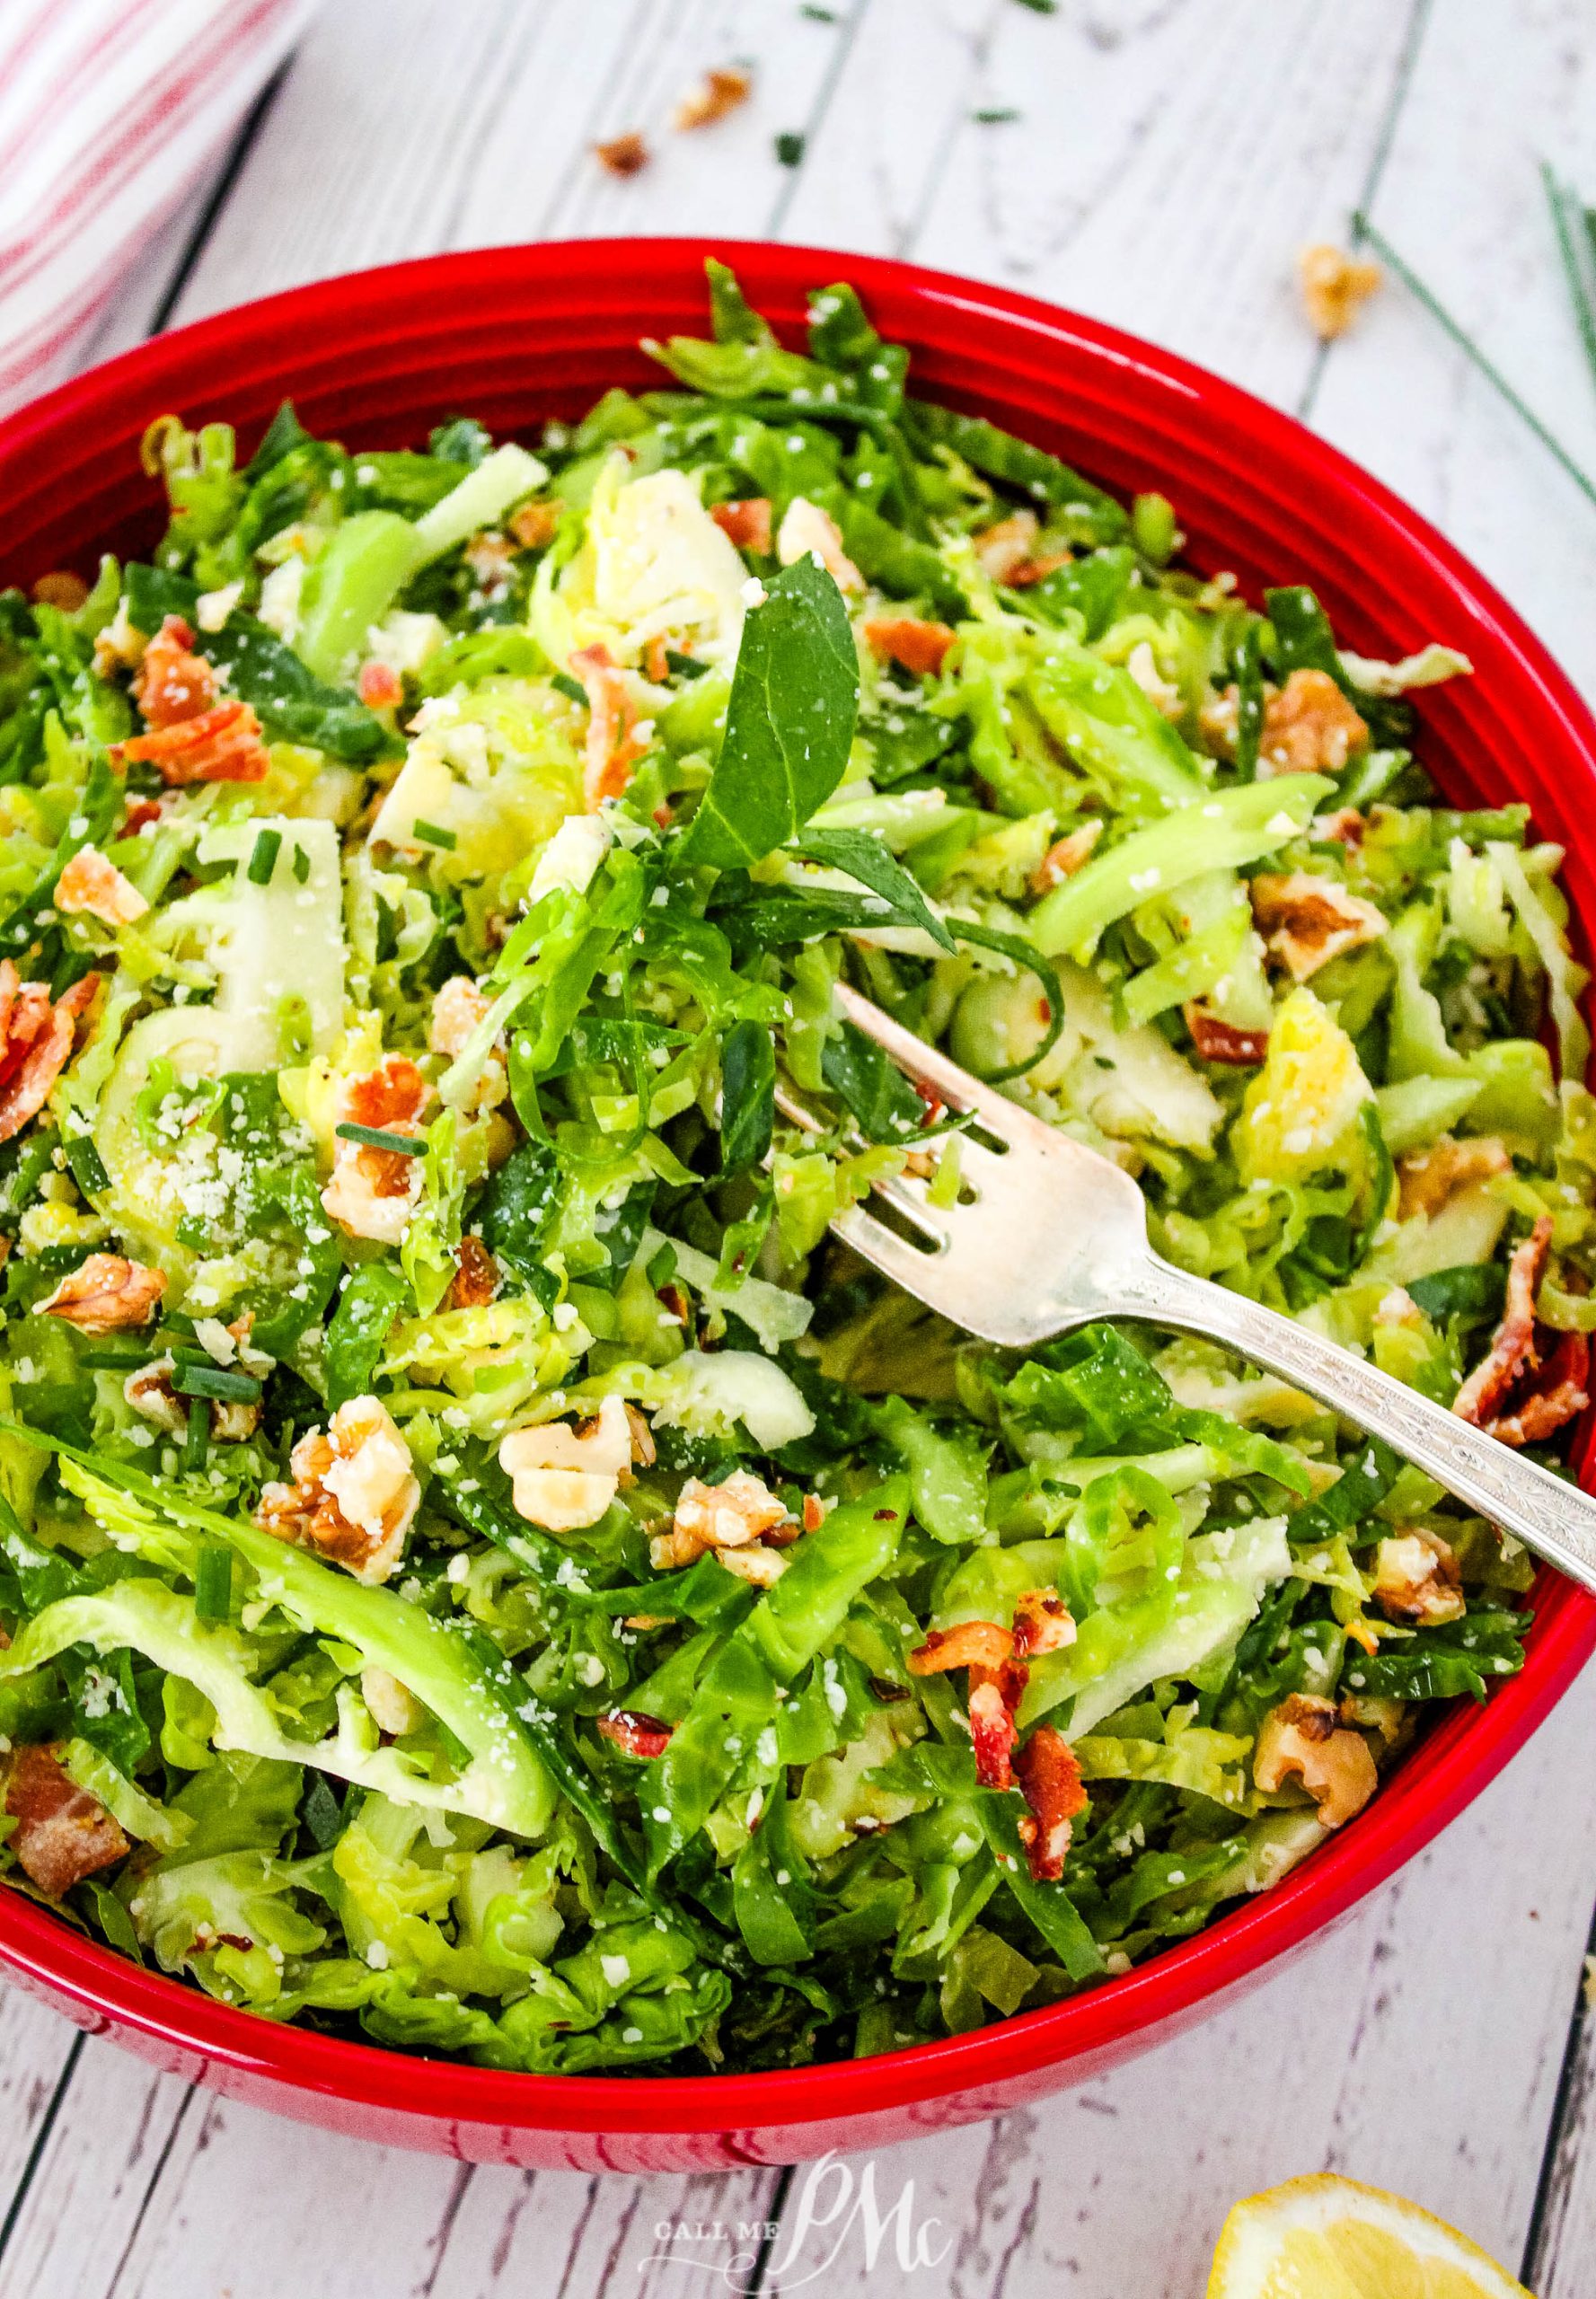 Brussels sprout salad with walnuts and lemon.